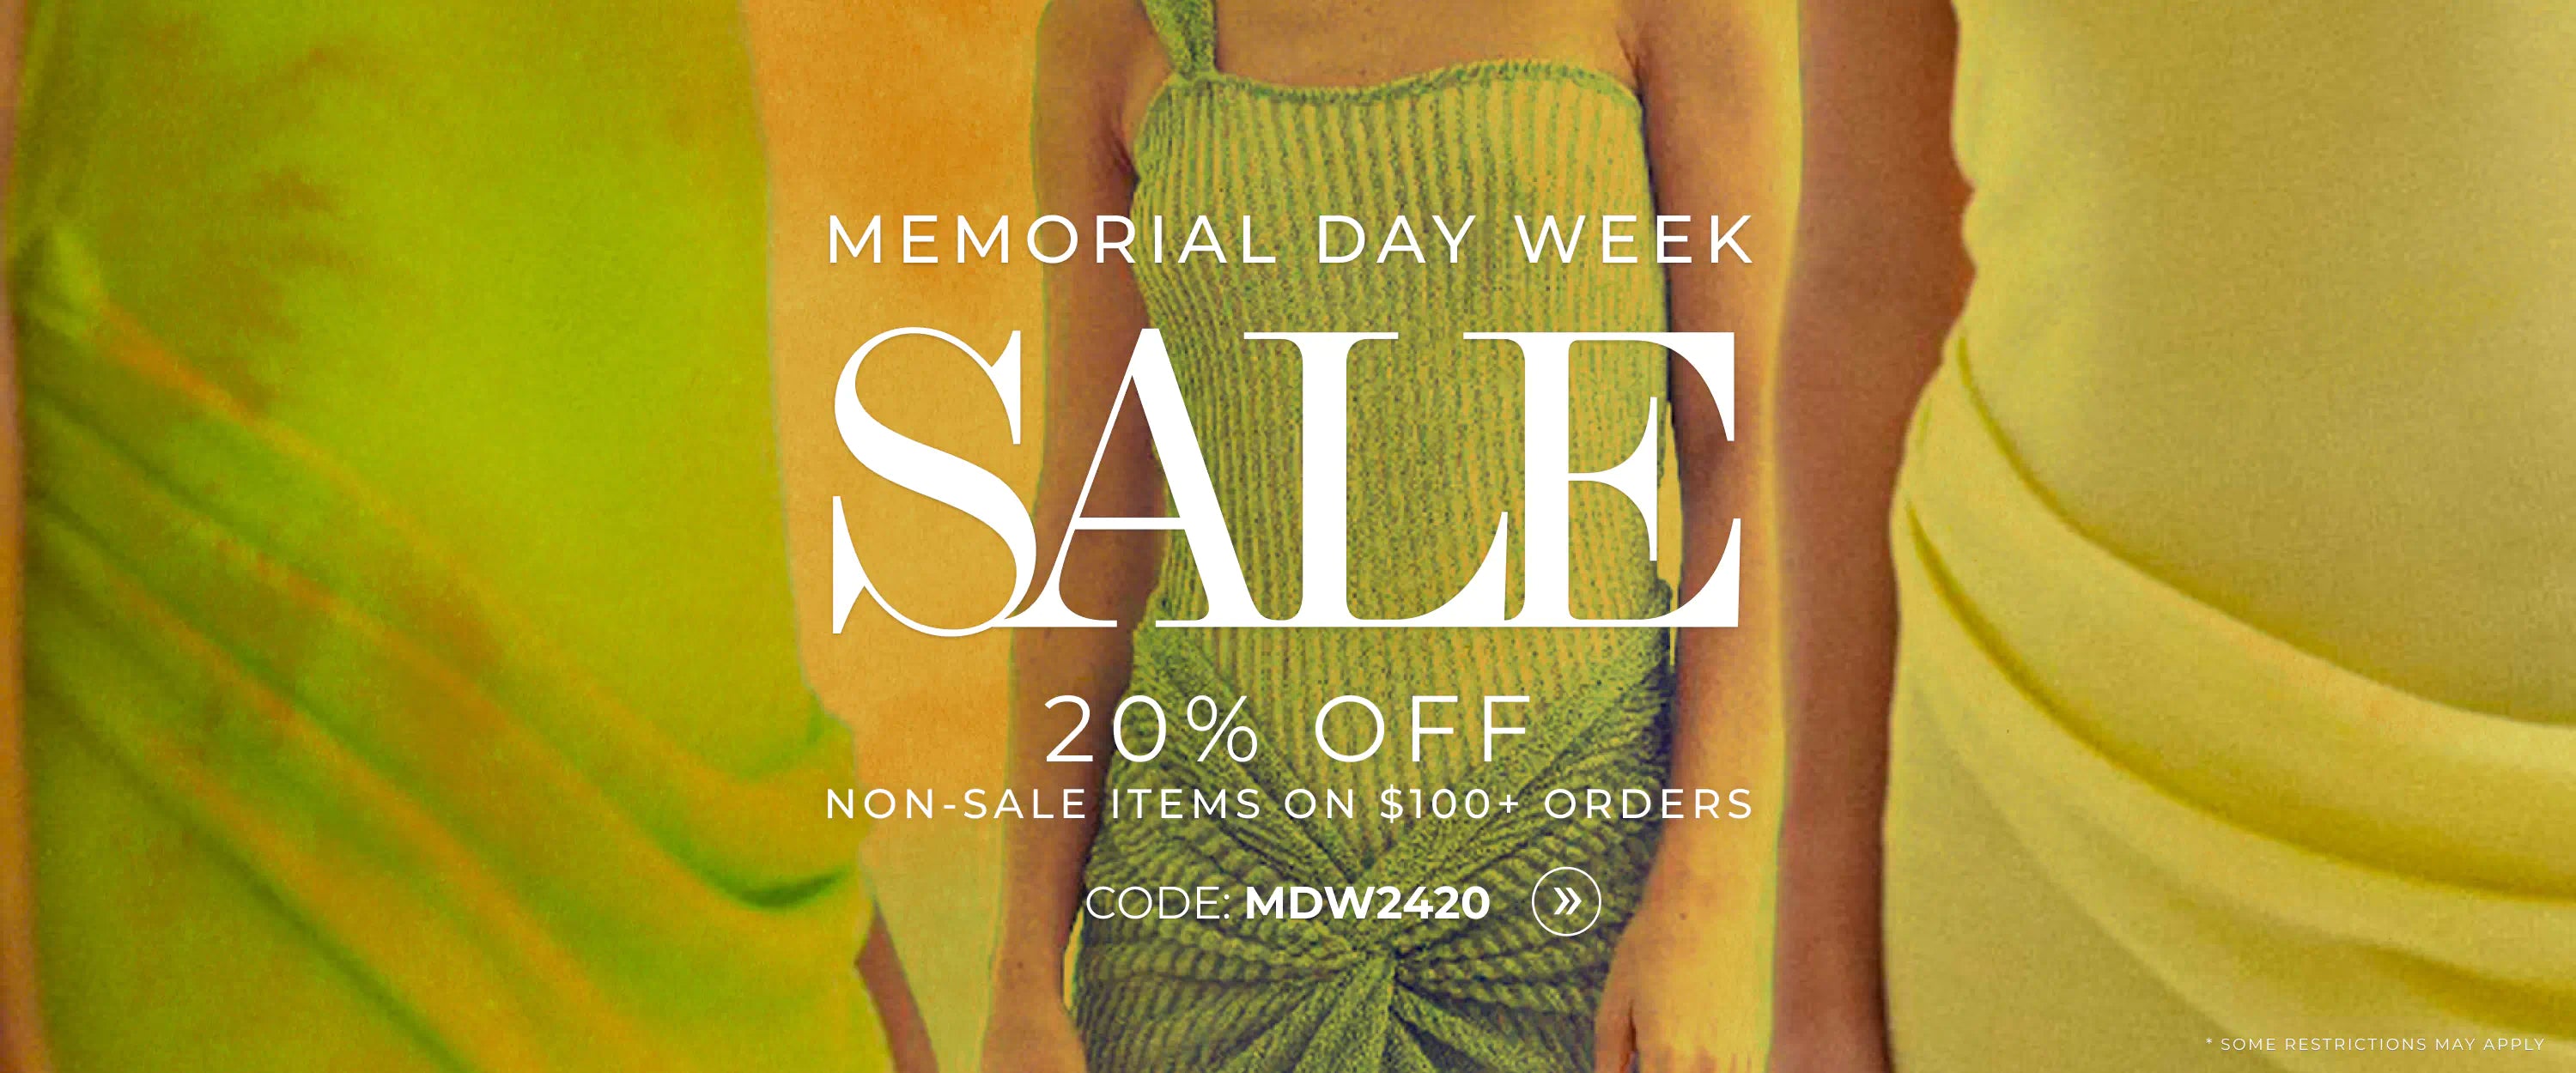 The Memorial Day Week Sale is here! 20% OFF non-sale items on $100+ orders. Use code: MDW2420. Shop now. Some restrictions may apply